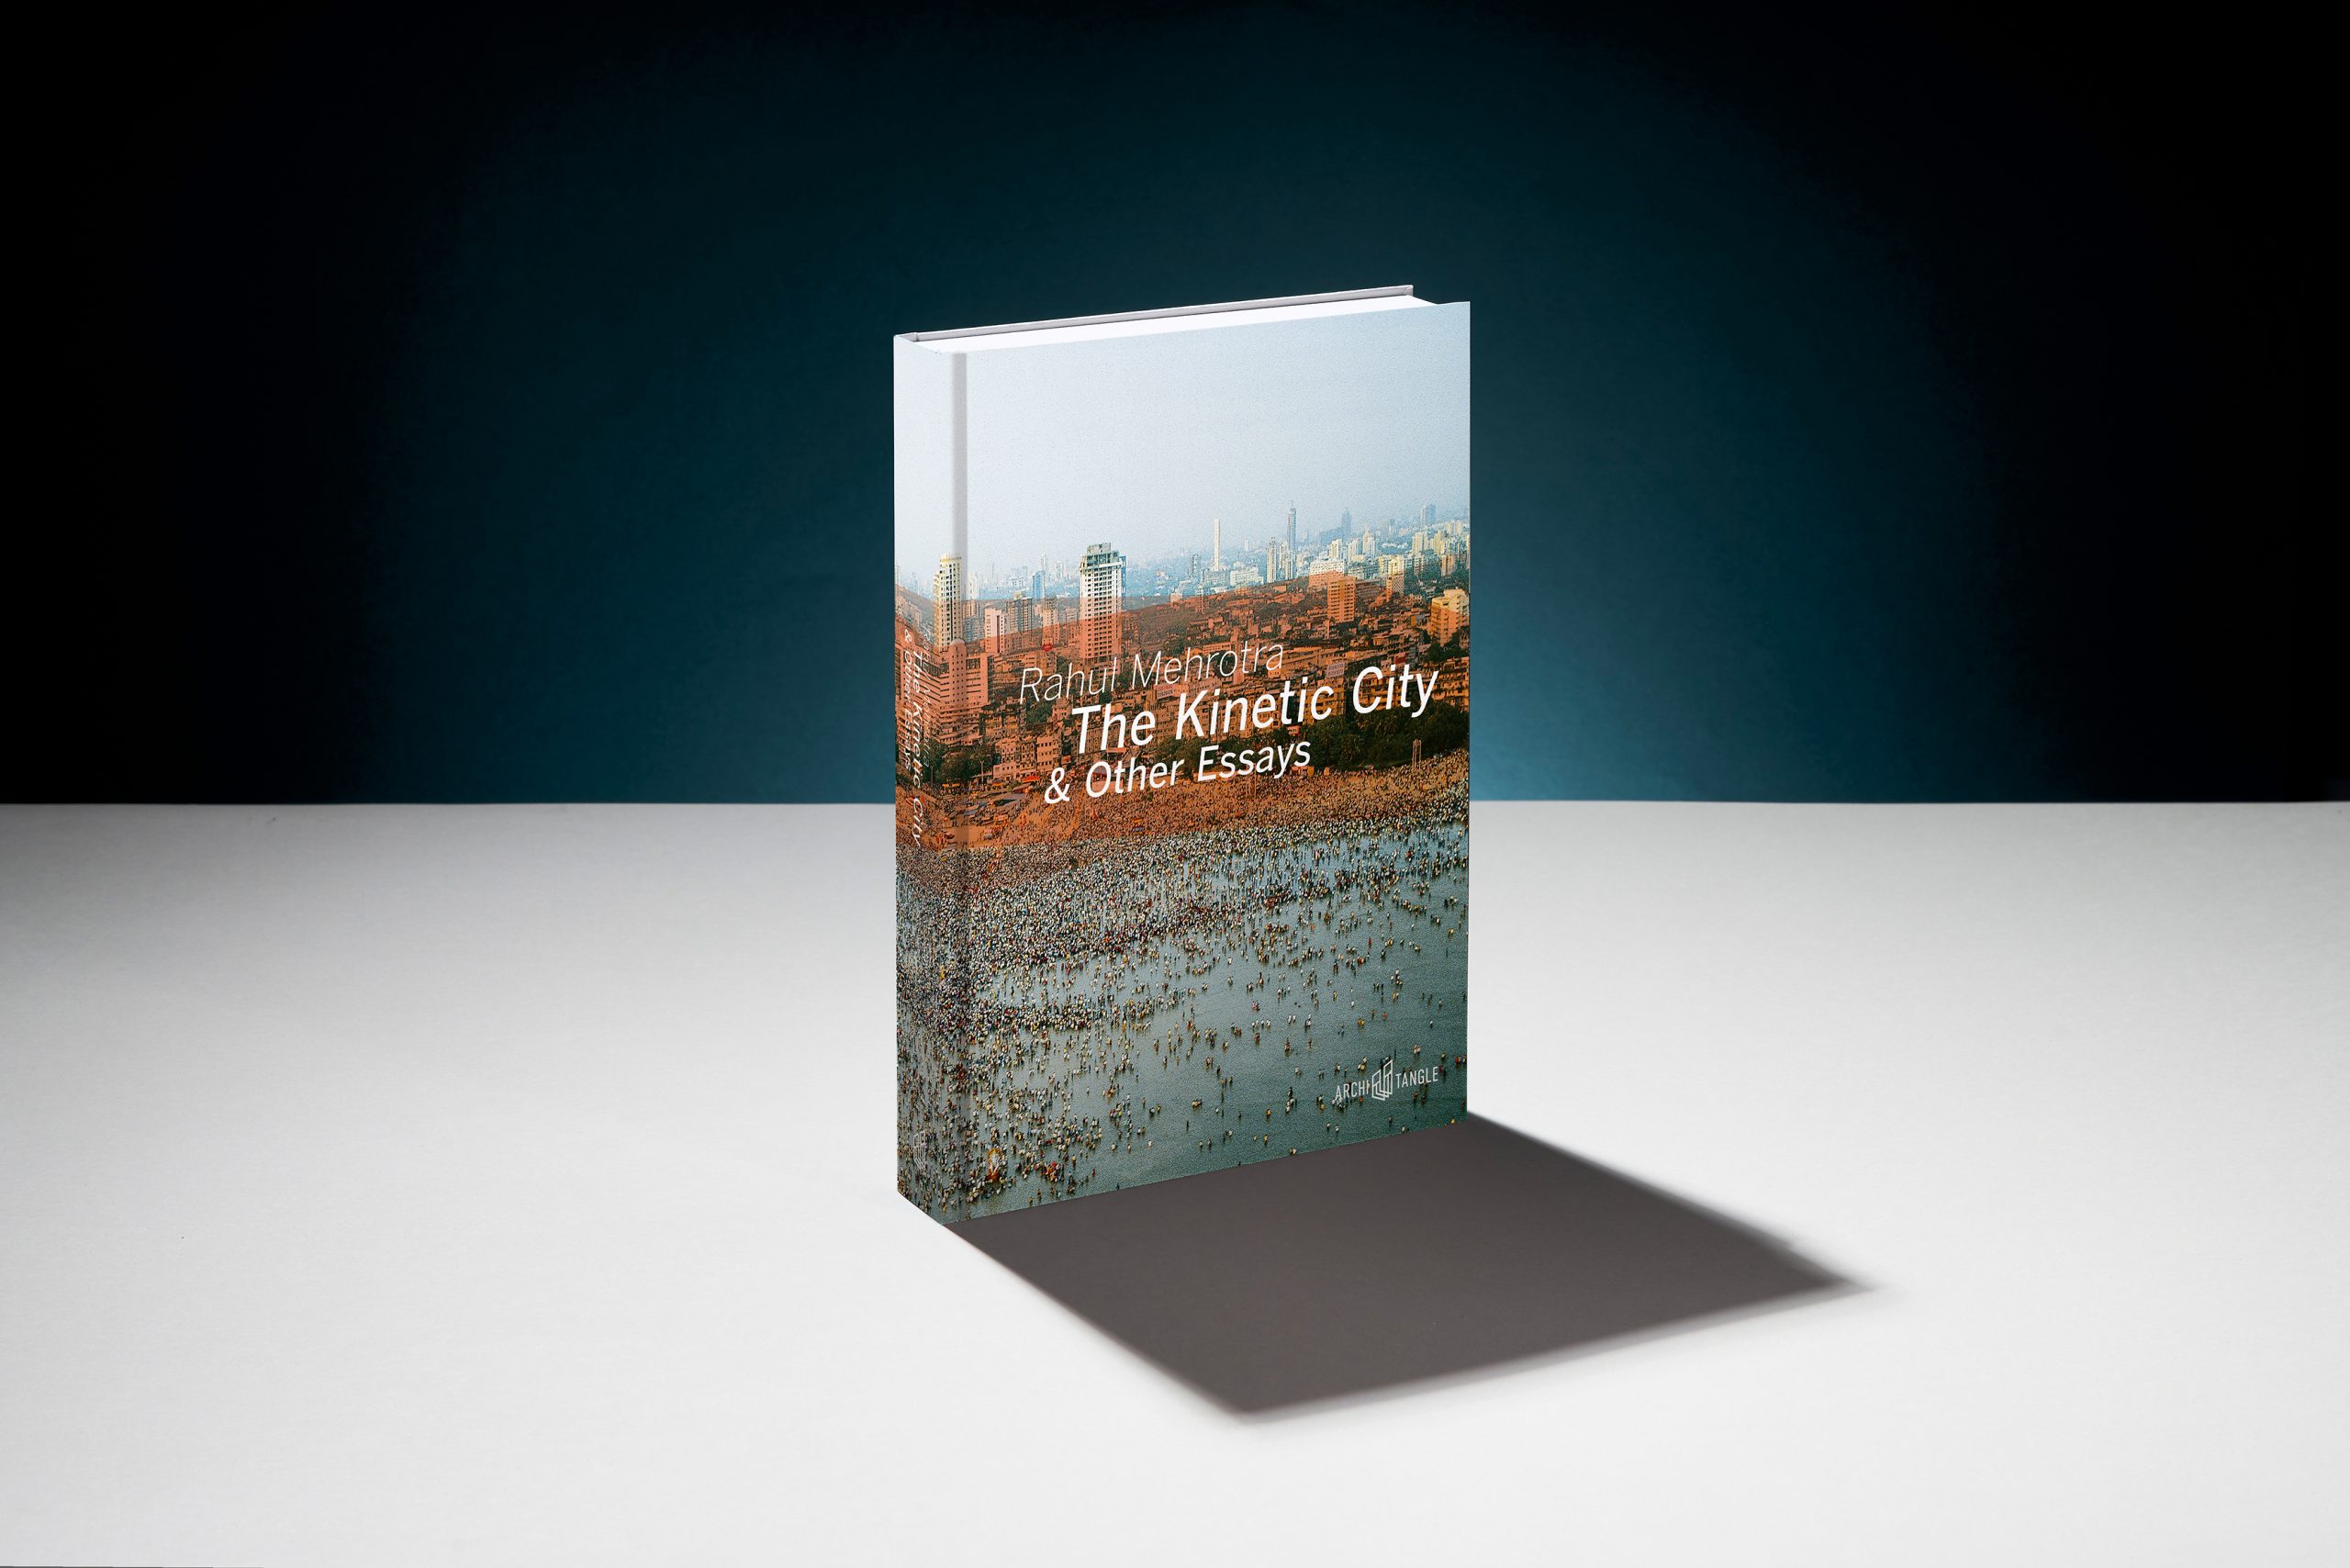 The Kinetic City & Other Essays